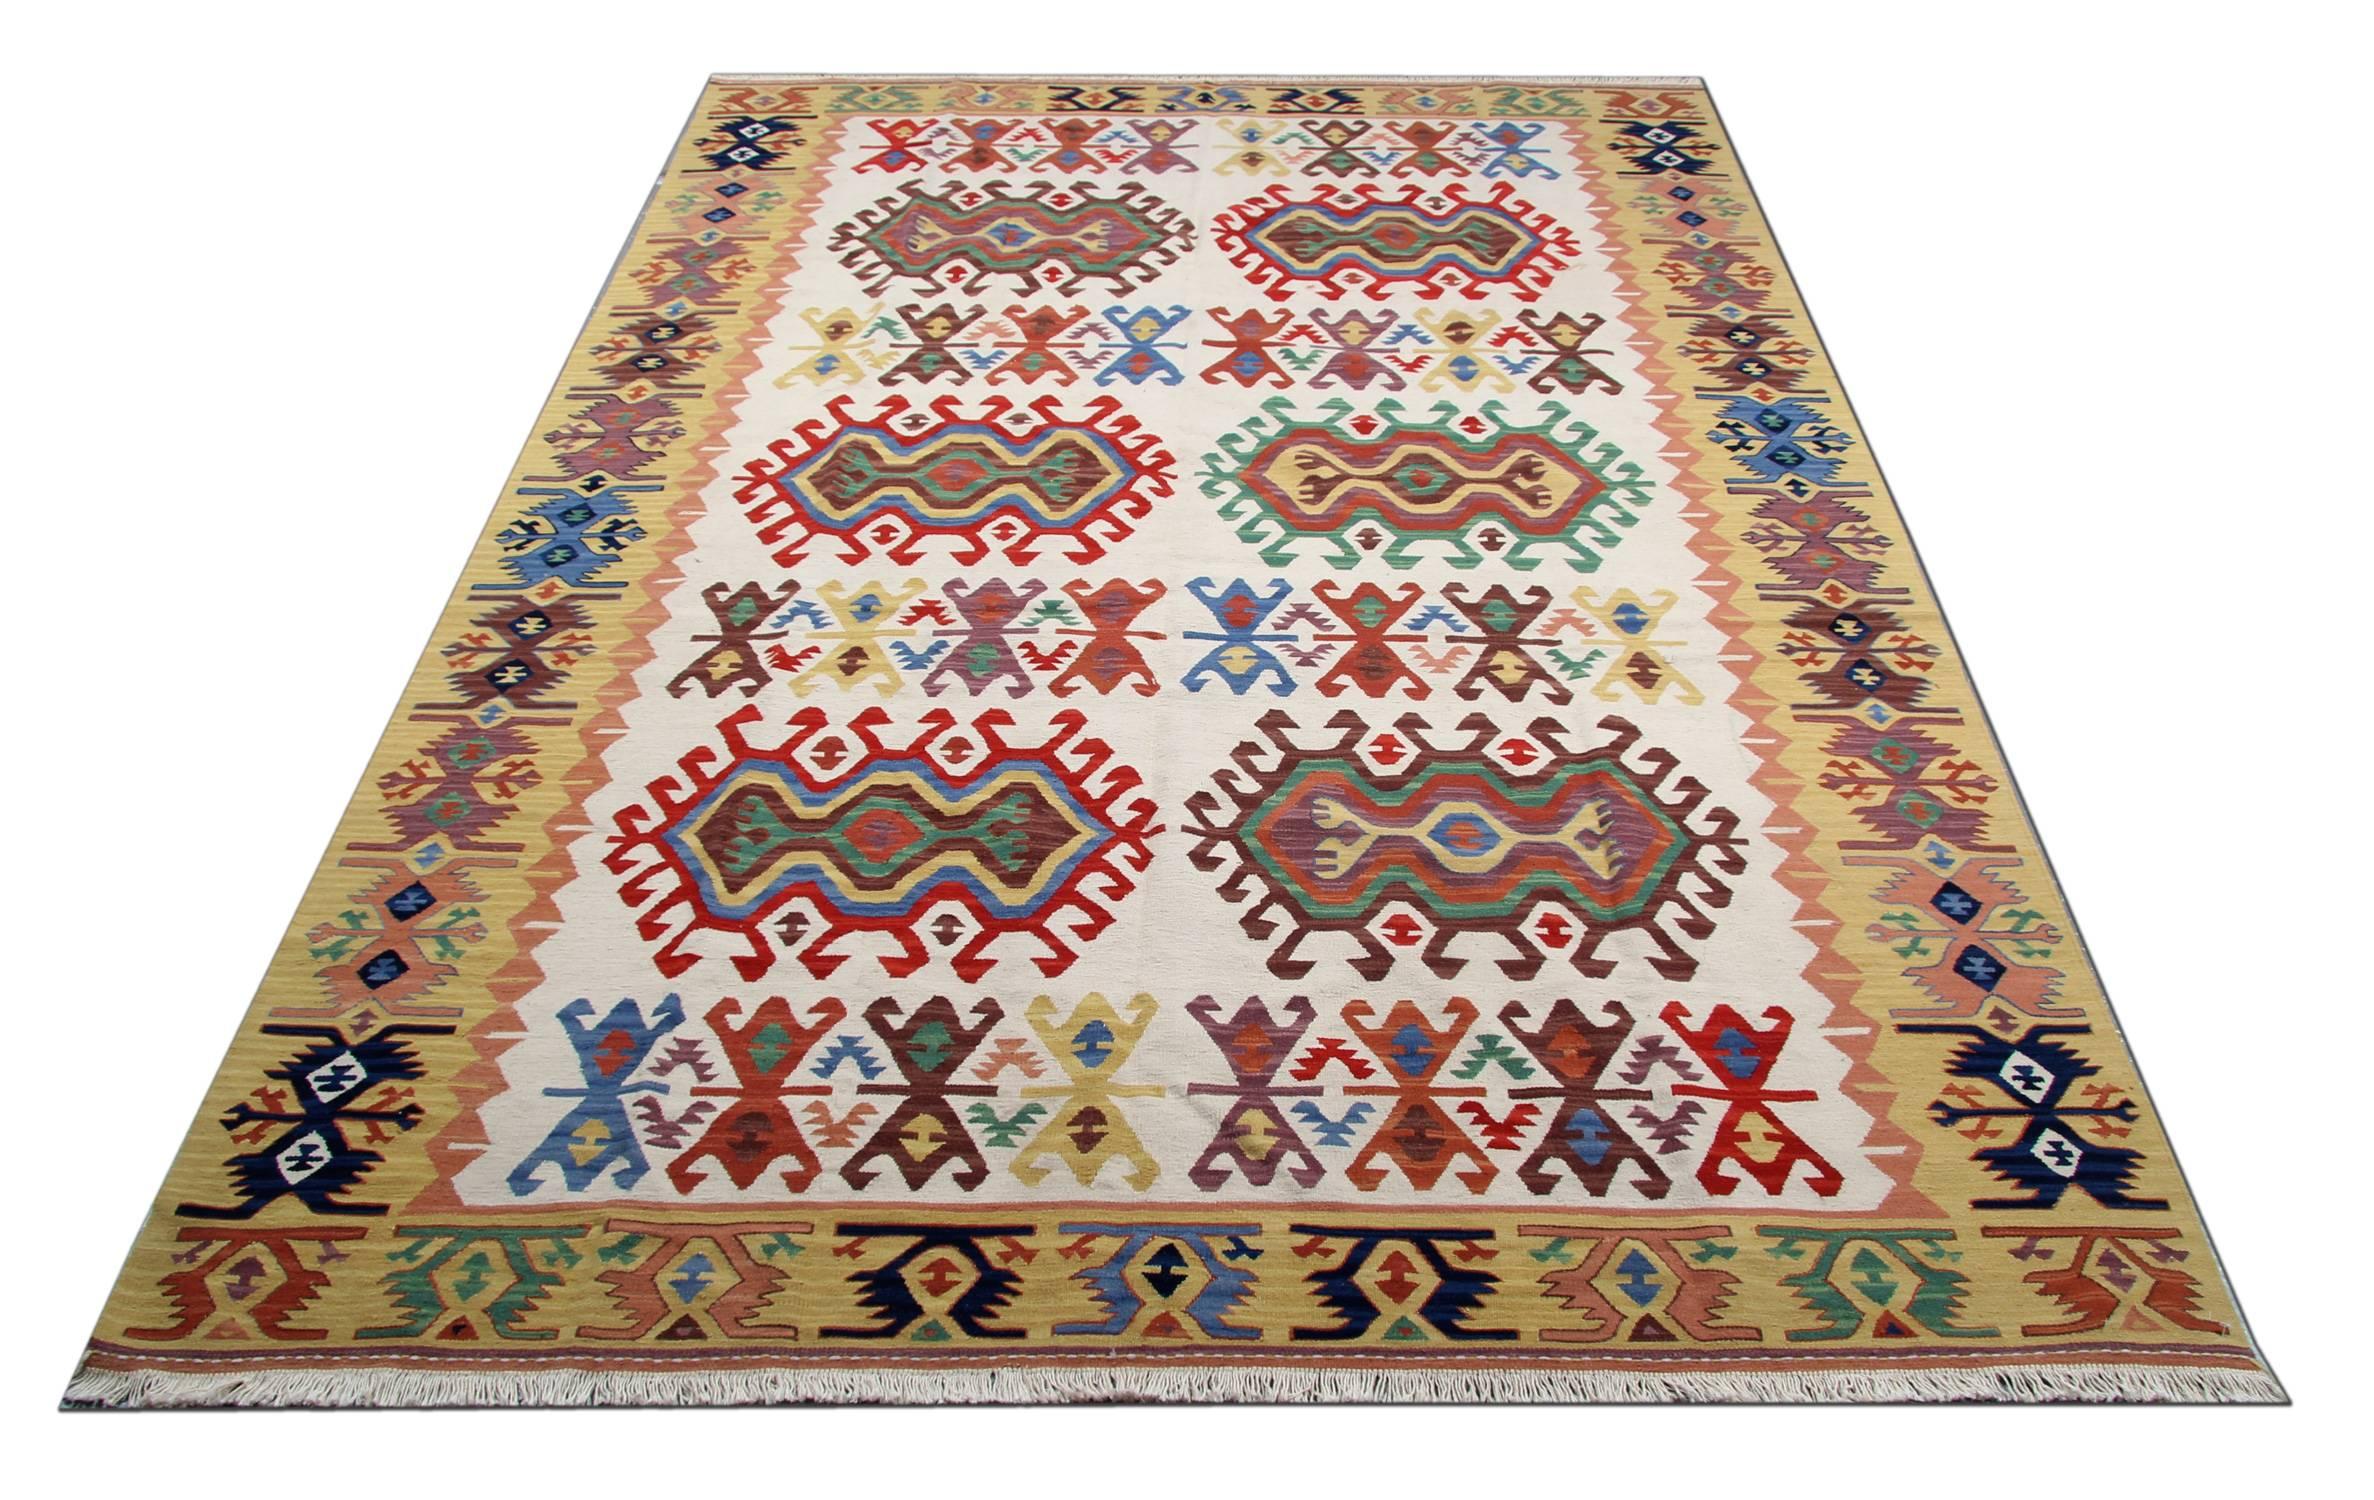 This fine wool area rug has been woven by hand and features a fantastic geometric medallion woven on a simple ivory cream background with a decorative surrounding design. Woven in accents of cream, green and yellow accents. Symmetrically woven with